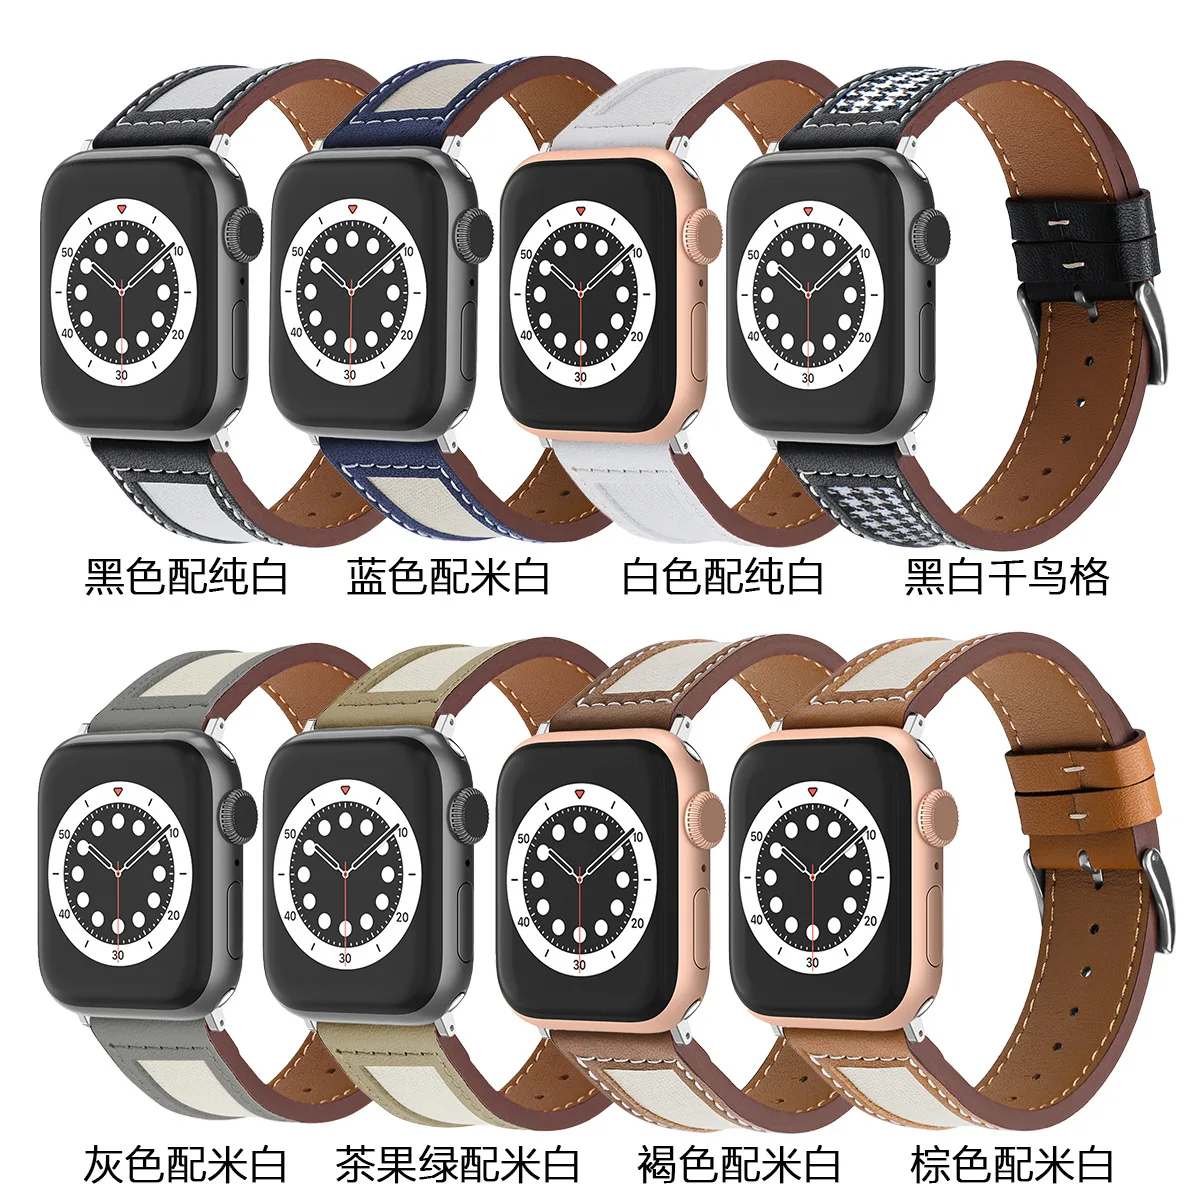 Apple Watch Leather Canvas Strap Contrast Strap enlarge